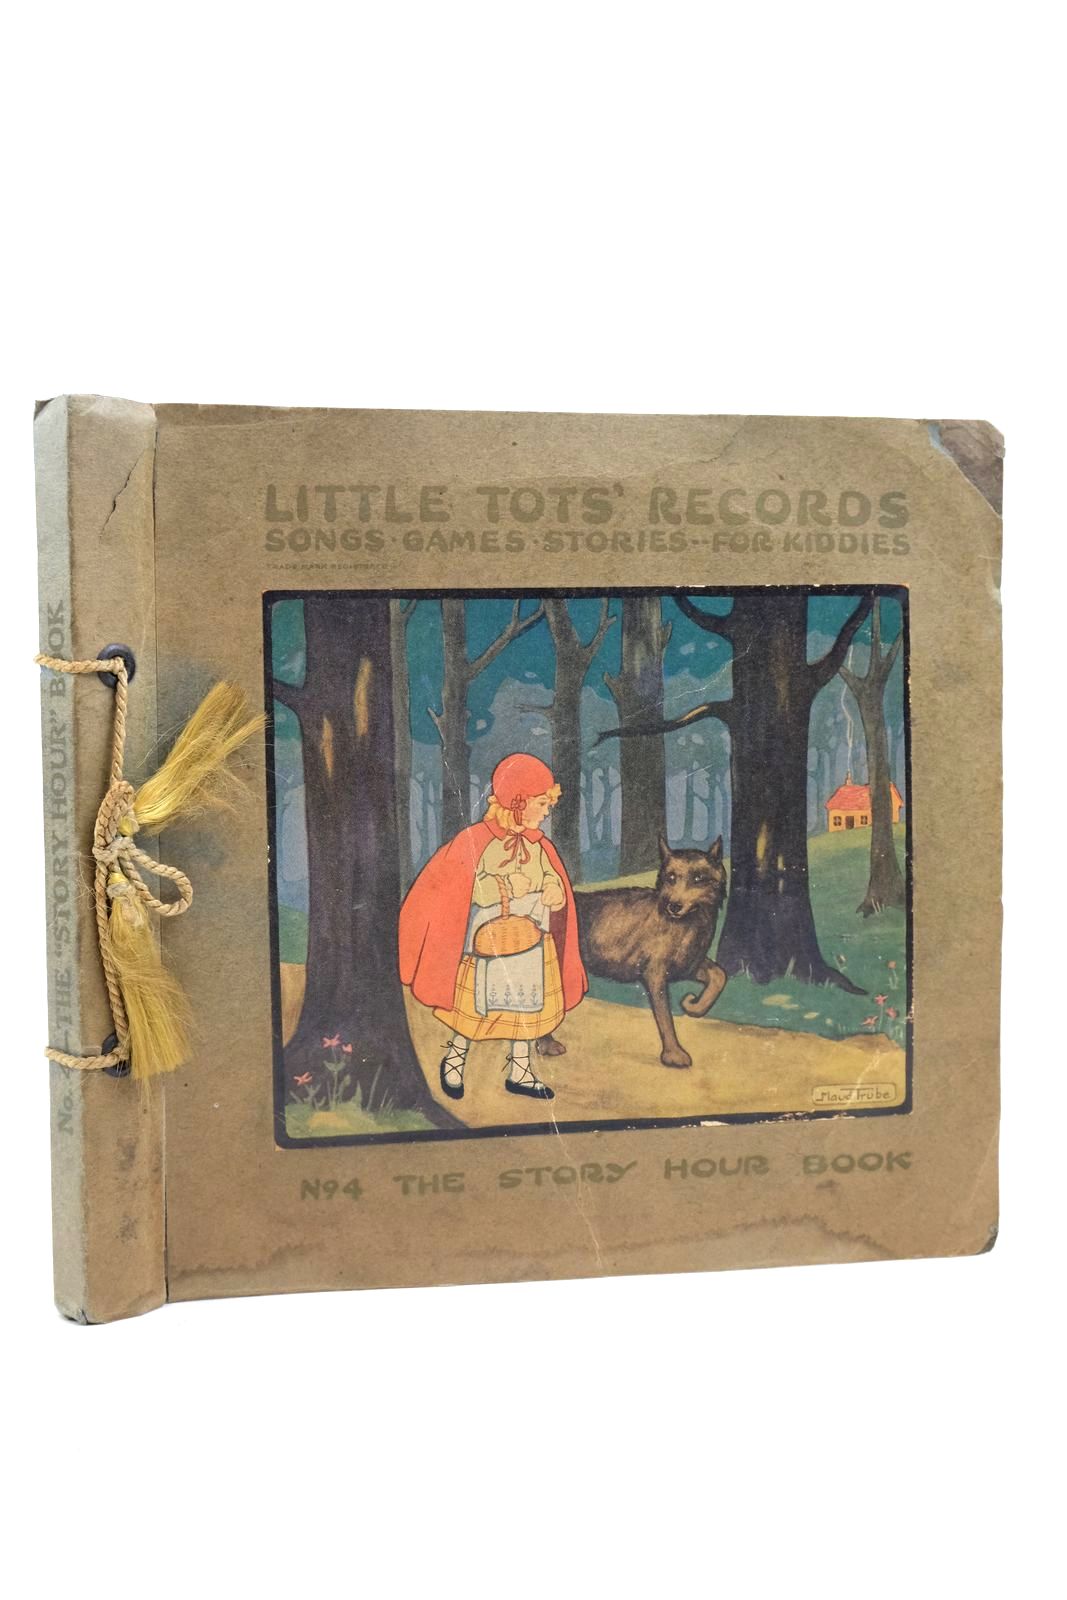 Photo of LITTLE TOTS' RECORDS: SONGS, GAMES, STORIES FOR KIDDIES No. 4 THE 